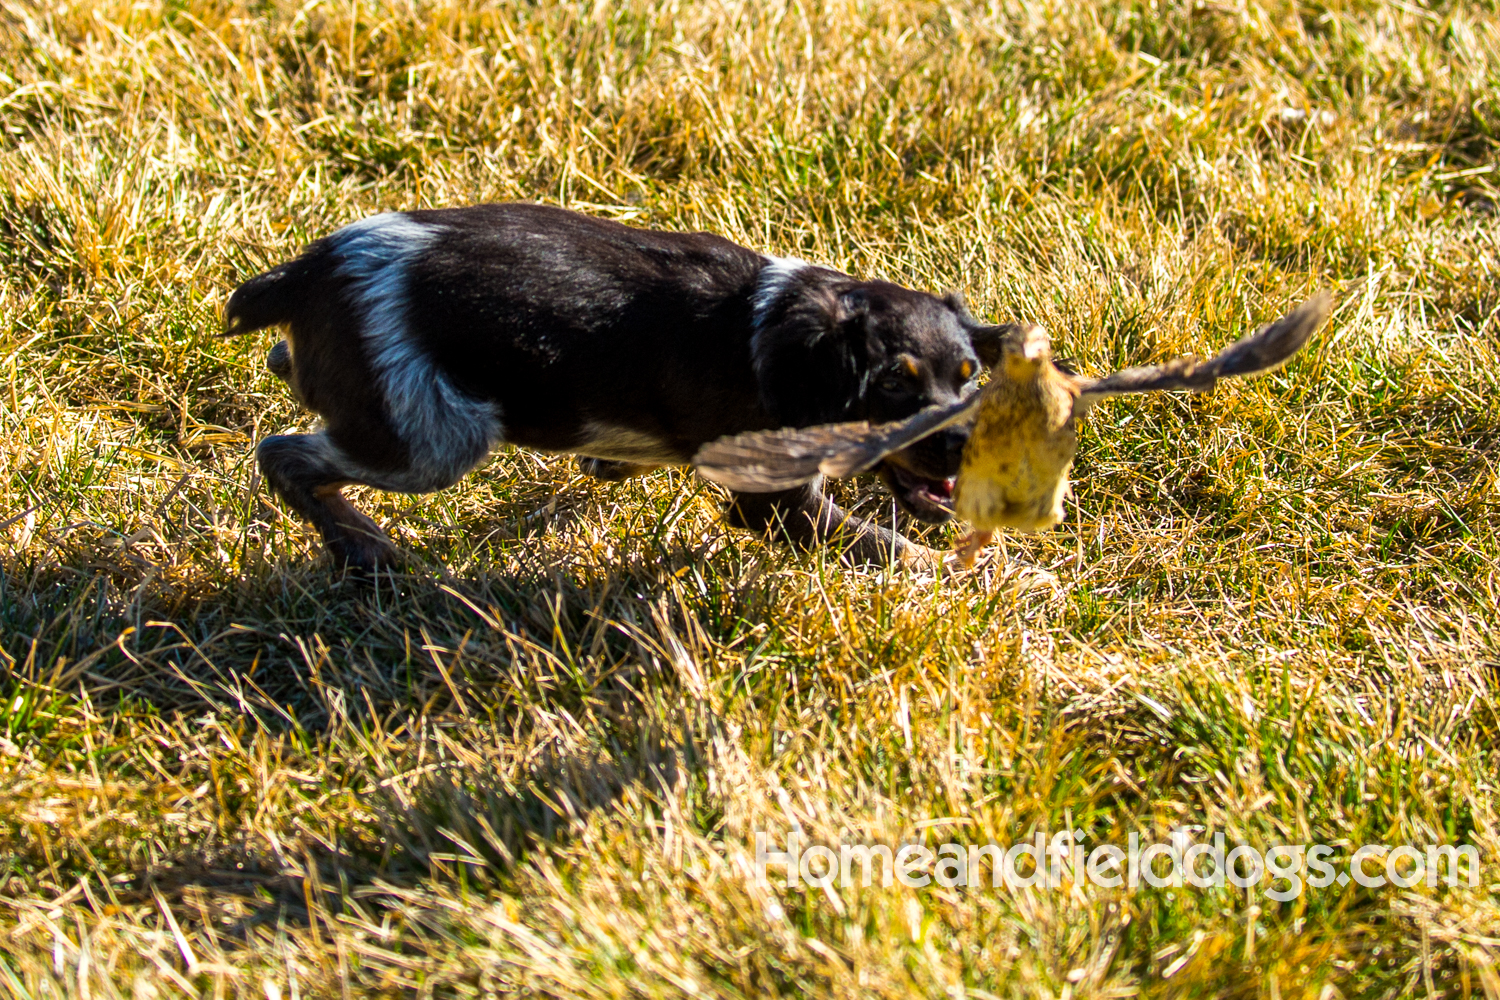 Photographs and pictures of French Brittany Spaniels playing in the field with Quail